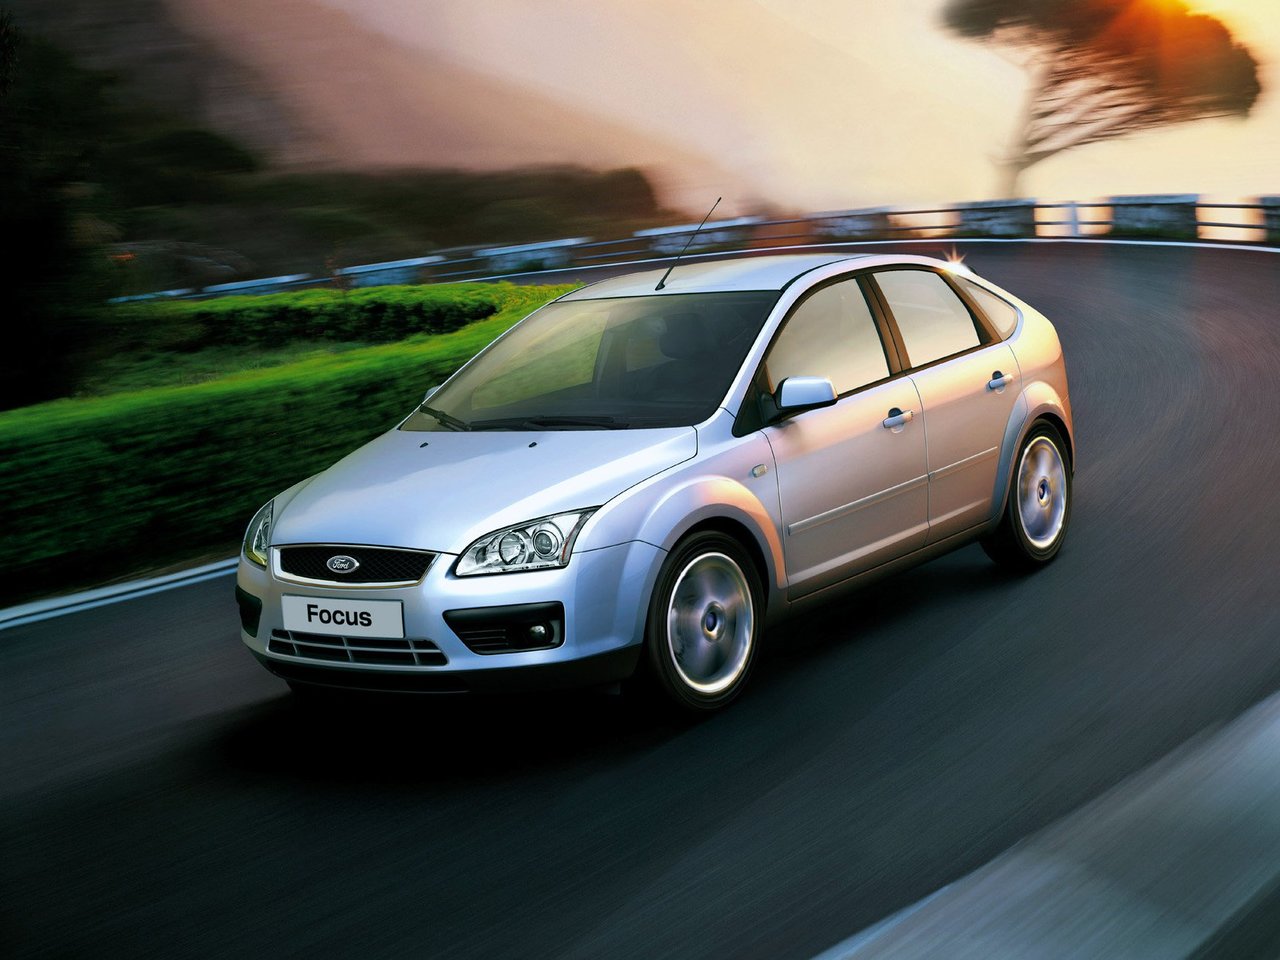 Форд фокус 125 лс. Ford Focus II 2005-2008. Ford Focus 2 2004-2011. Форд фокус 2 2008. Ford Focus II 2004.